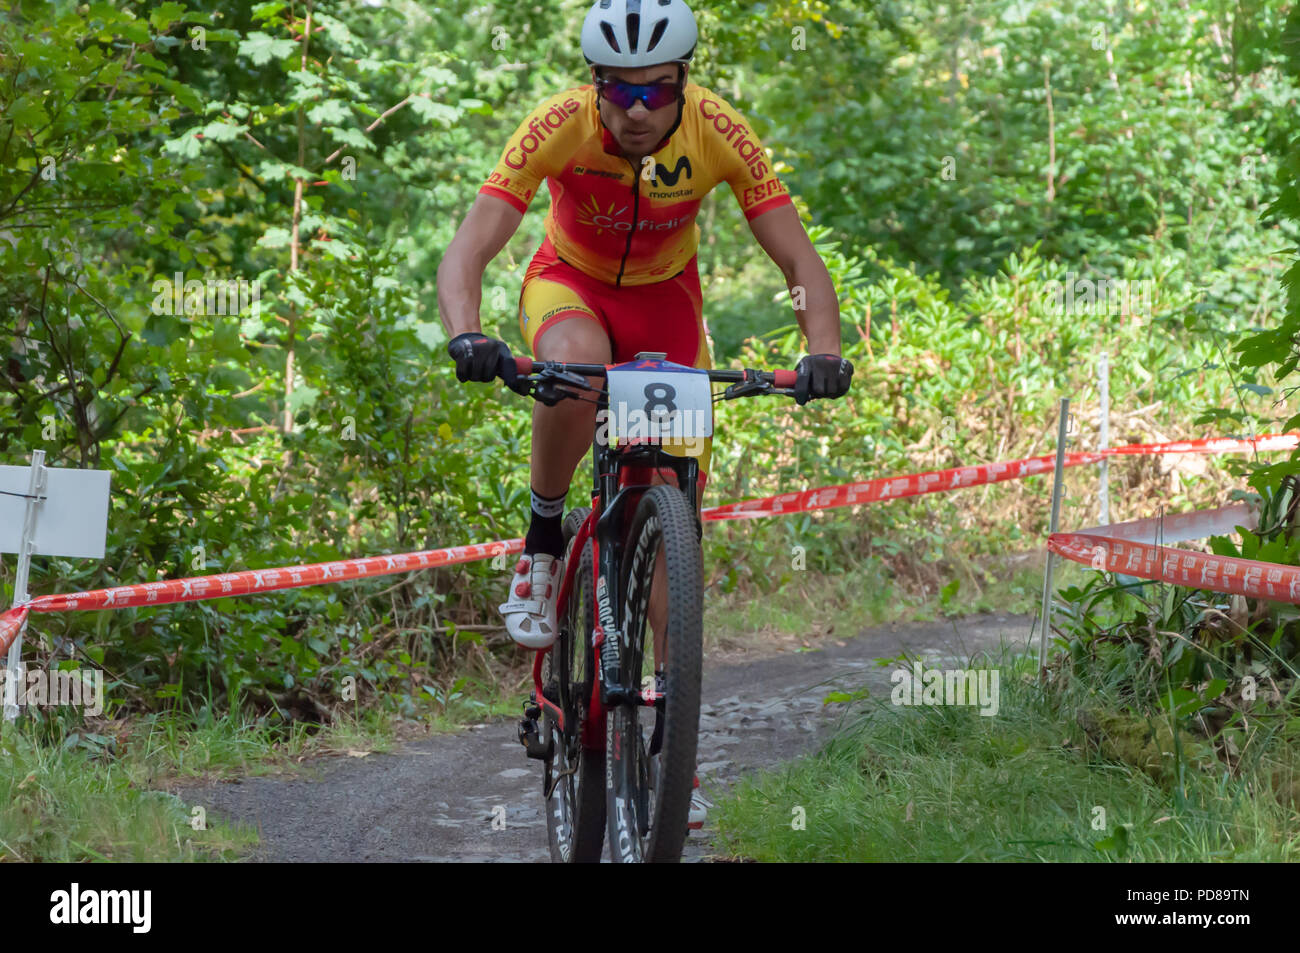 Glasgow, Scotland, UK. 7th August, 2018. Sergio Mantecon Gutierrez of Spain rides in the Men's Mountain Bike Cross-Country at Cathkin Braes Mountain Bike Trails on Day Six of the European Championships Glasgow 2018. Credit: Skully/Alamy Live News Stock Photo